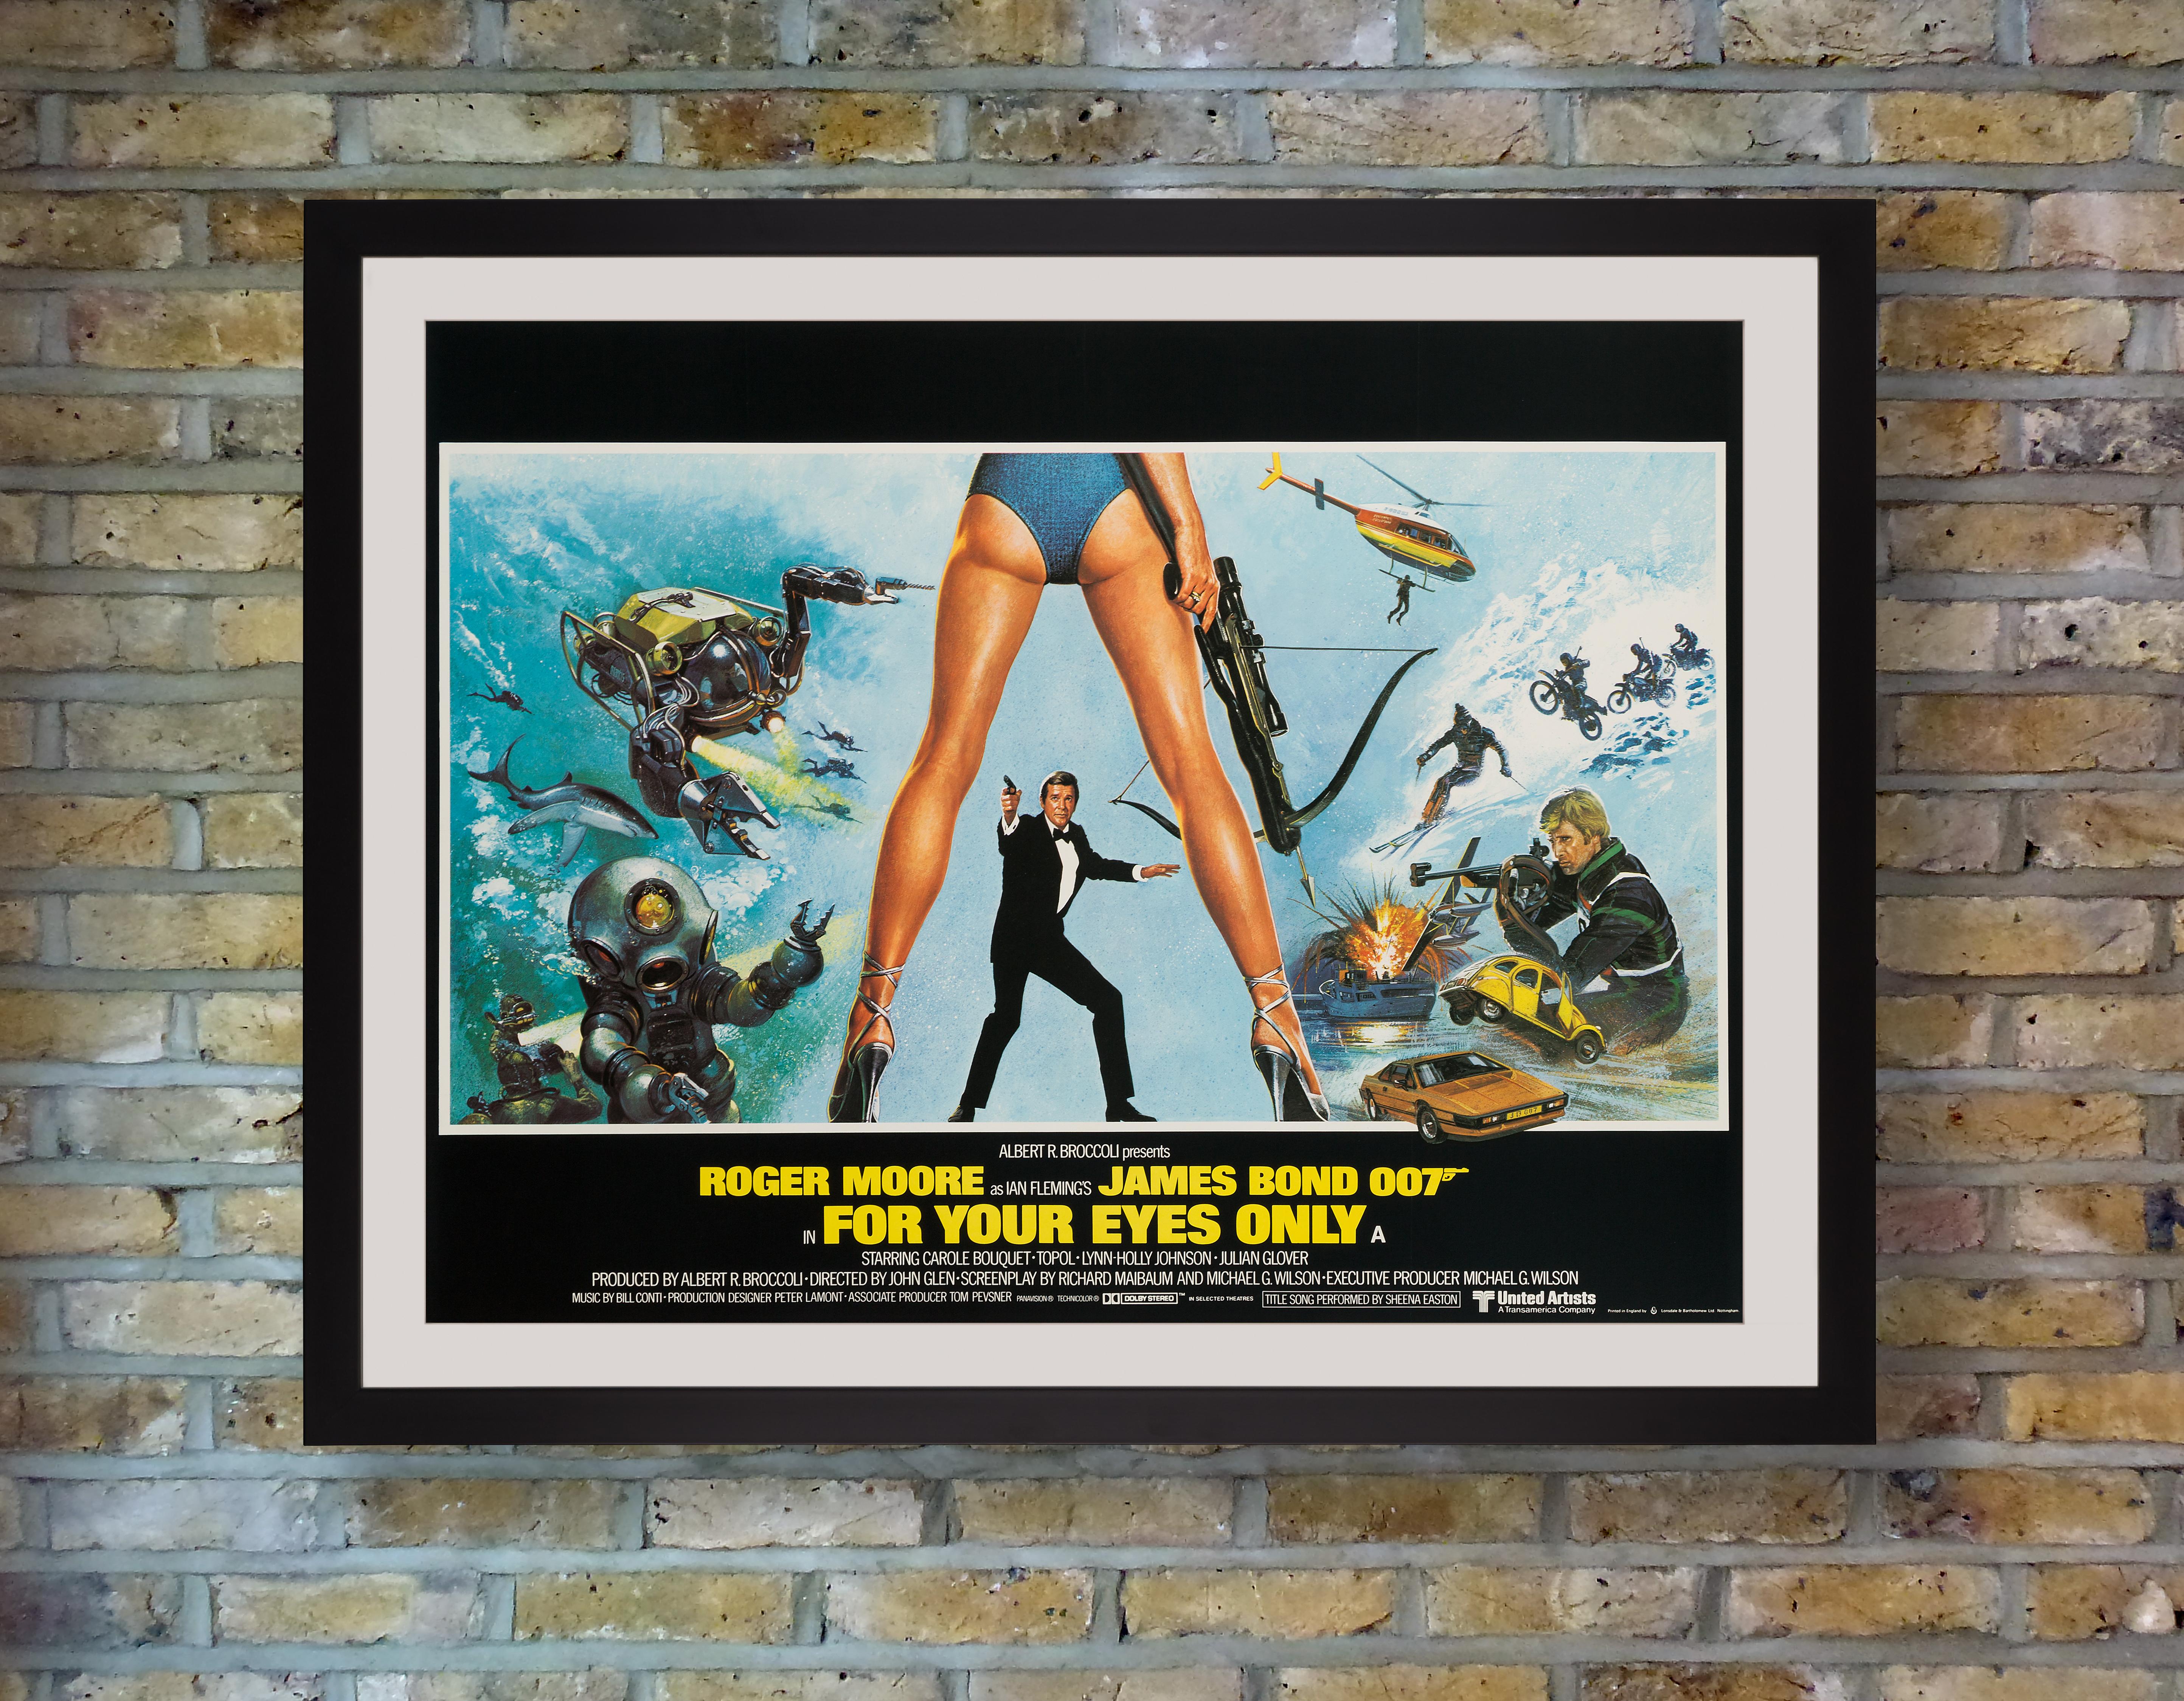 The twelfth film in the James Bond series, EON Productions 'For Your Eyes Only' saw a return to earth with a more realistic and less sensational storyline after the extravagance of 'Moonraker.' In Roger Moore's fifth outing as 007, he attempts to